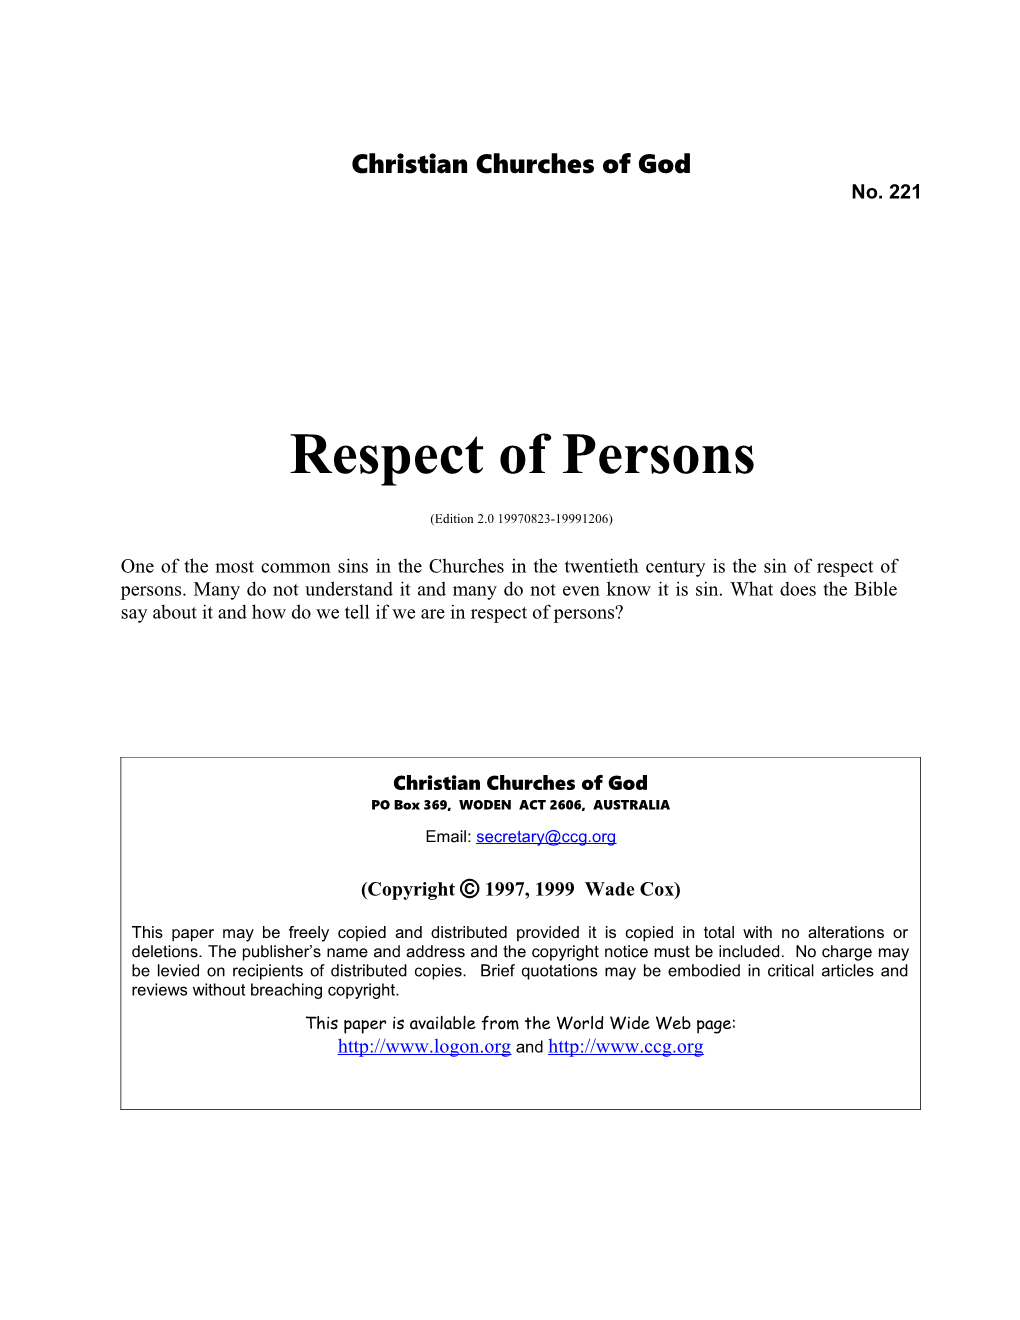 Respect of Persons (No. 221)